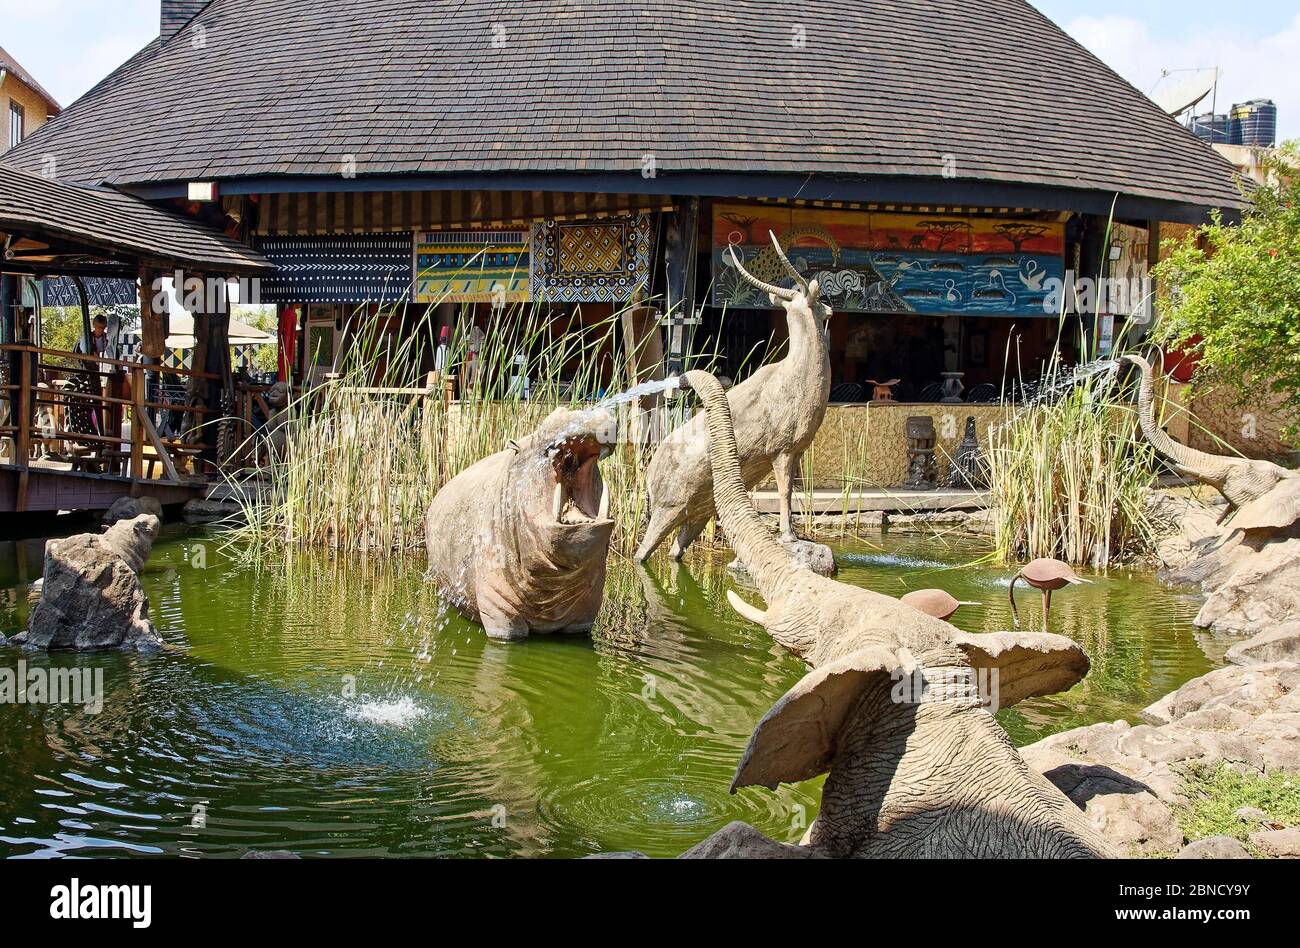 water garden, wild animal sculptures, two elephants spouting water, circular pavilion, shingle roof, Cultural Heritage Center, Africa, Arusha, Tanzani Stock Photo